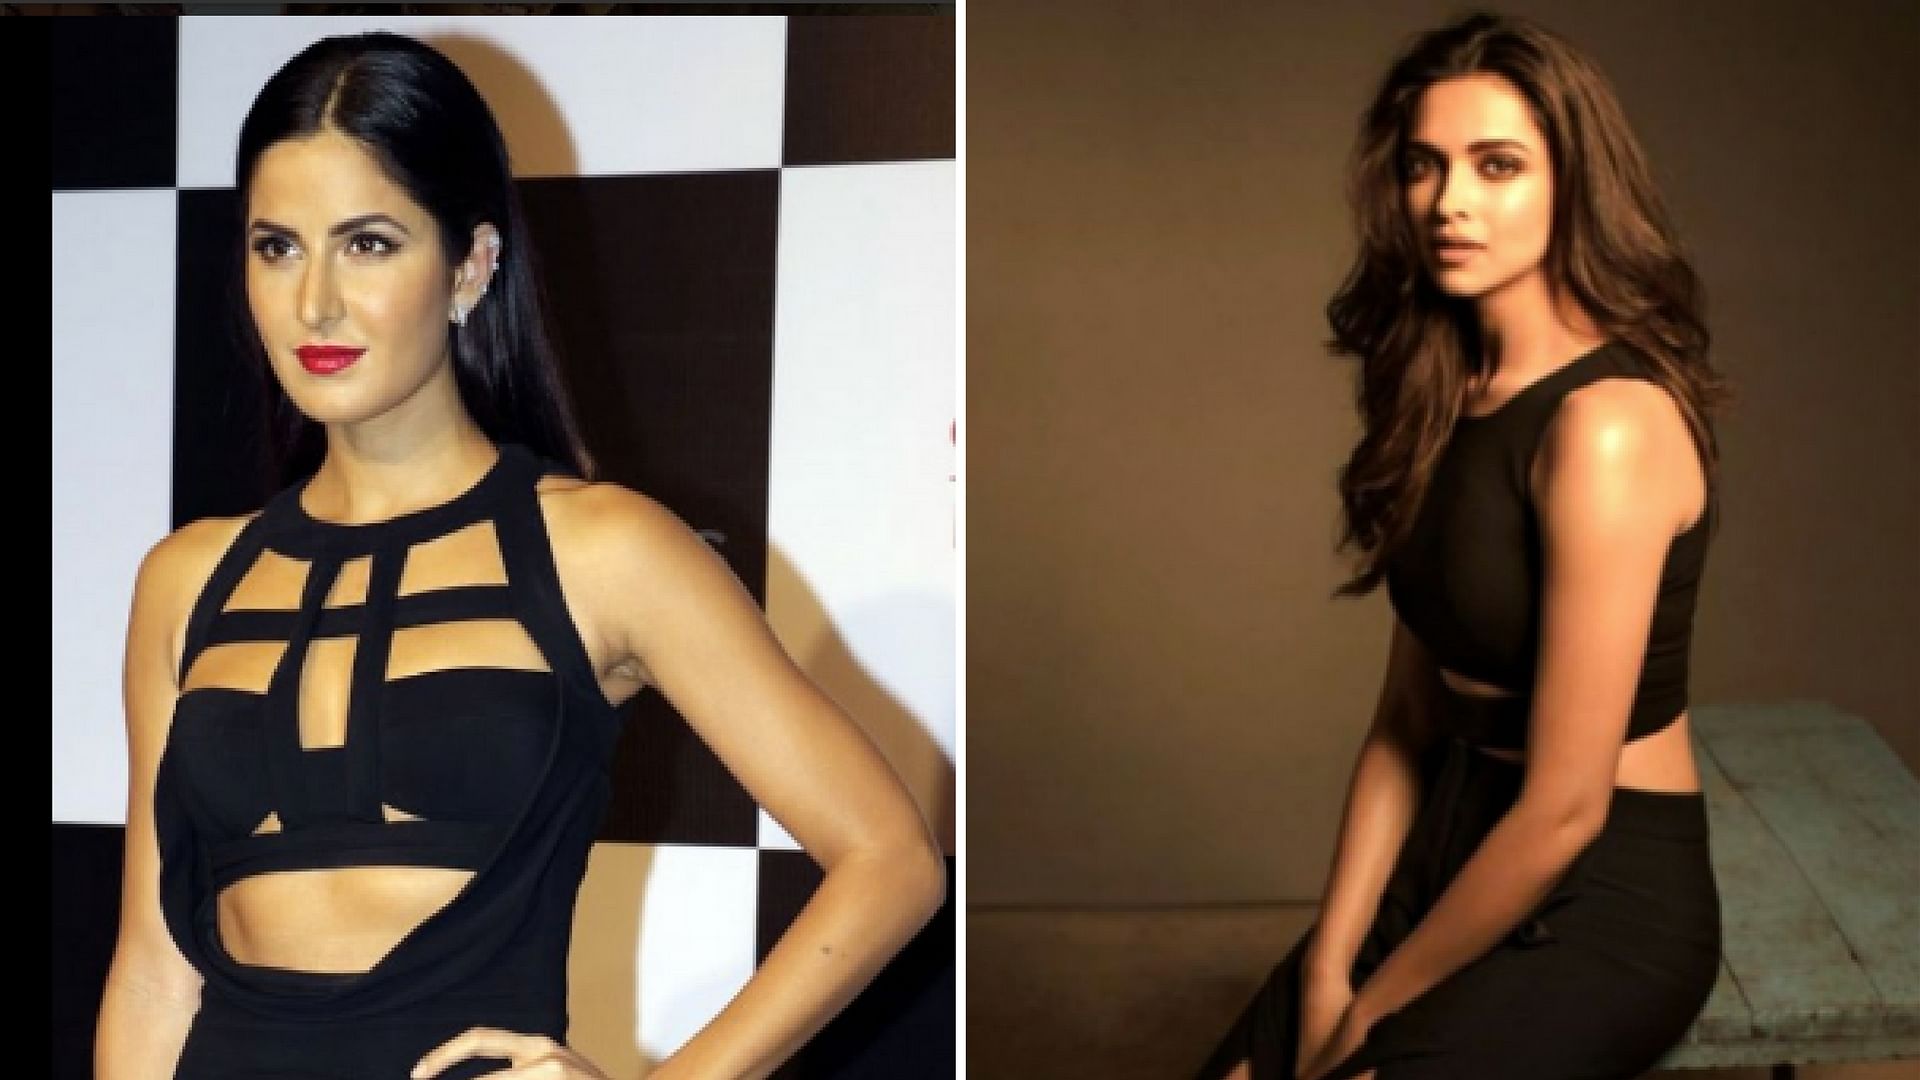 Katrina replaces Deepika Padukone in a Dharma production. (Photo courtesy: Twitter/<a href="https://twitter.com/LOrealParisIn">@LOrealParisIn</a>/<a href="https://twitter.com/Jasbirsaini30">@Jasbirsaini30</a>)